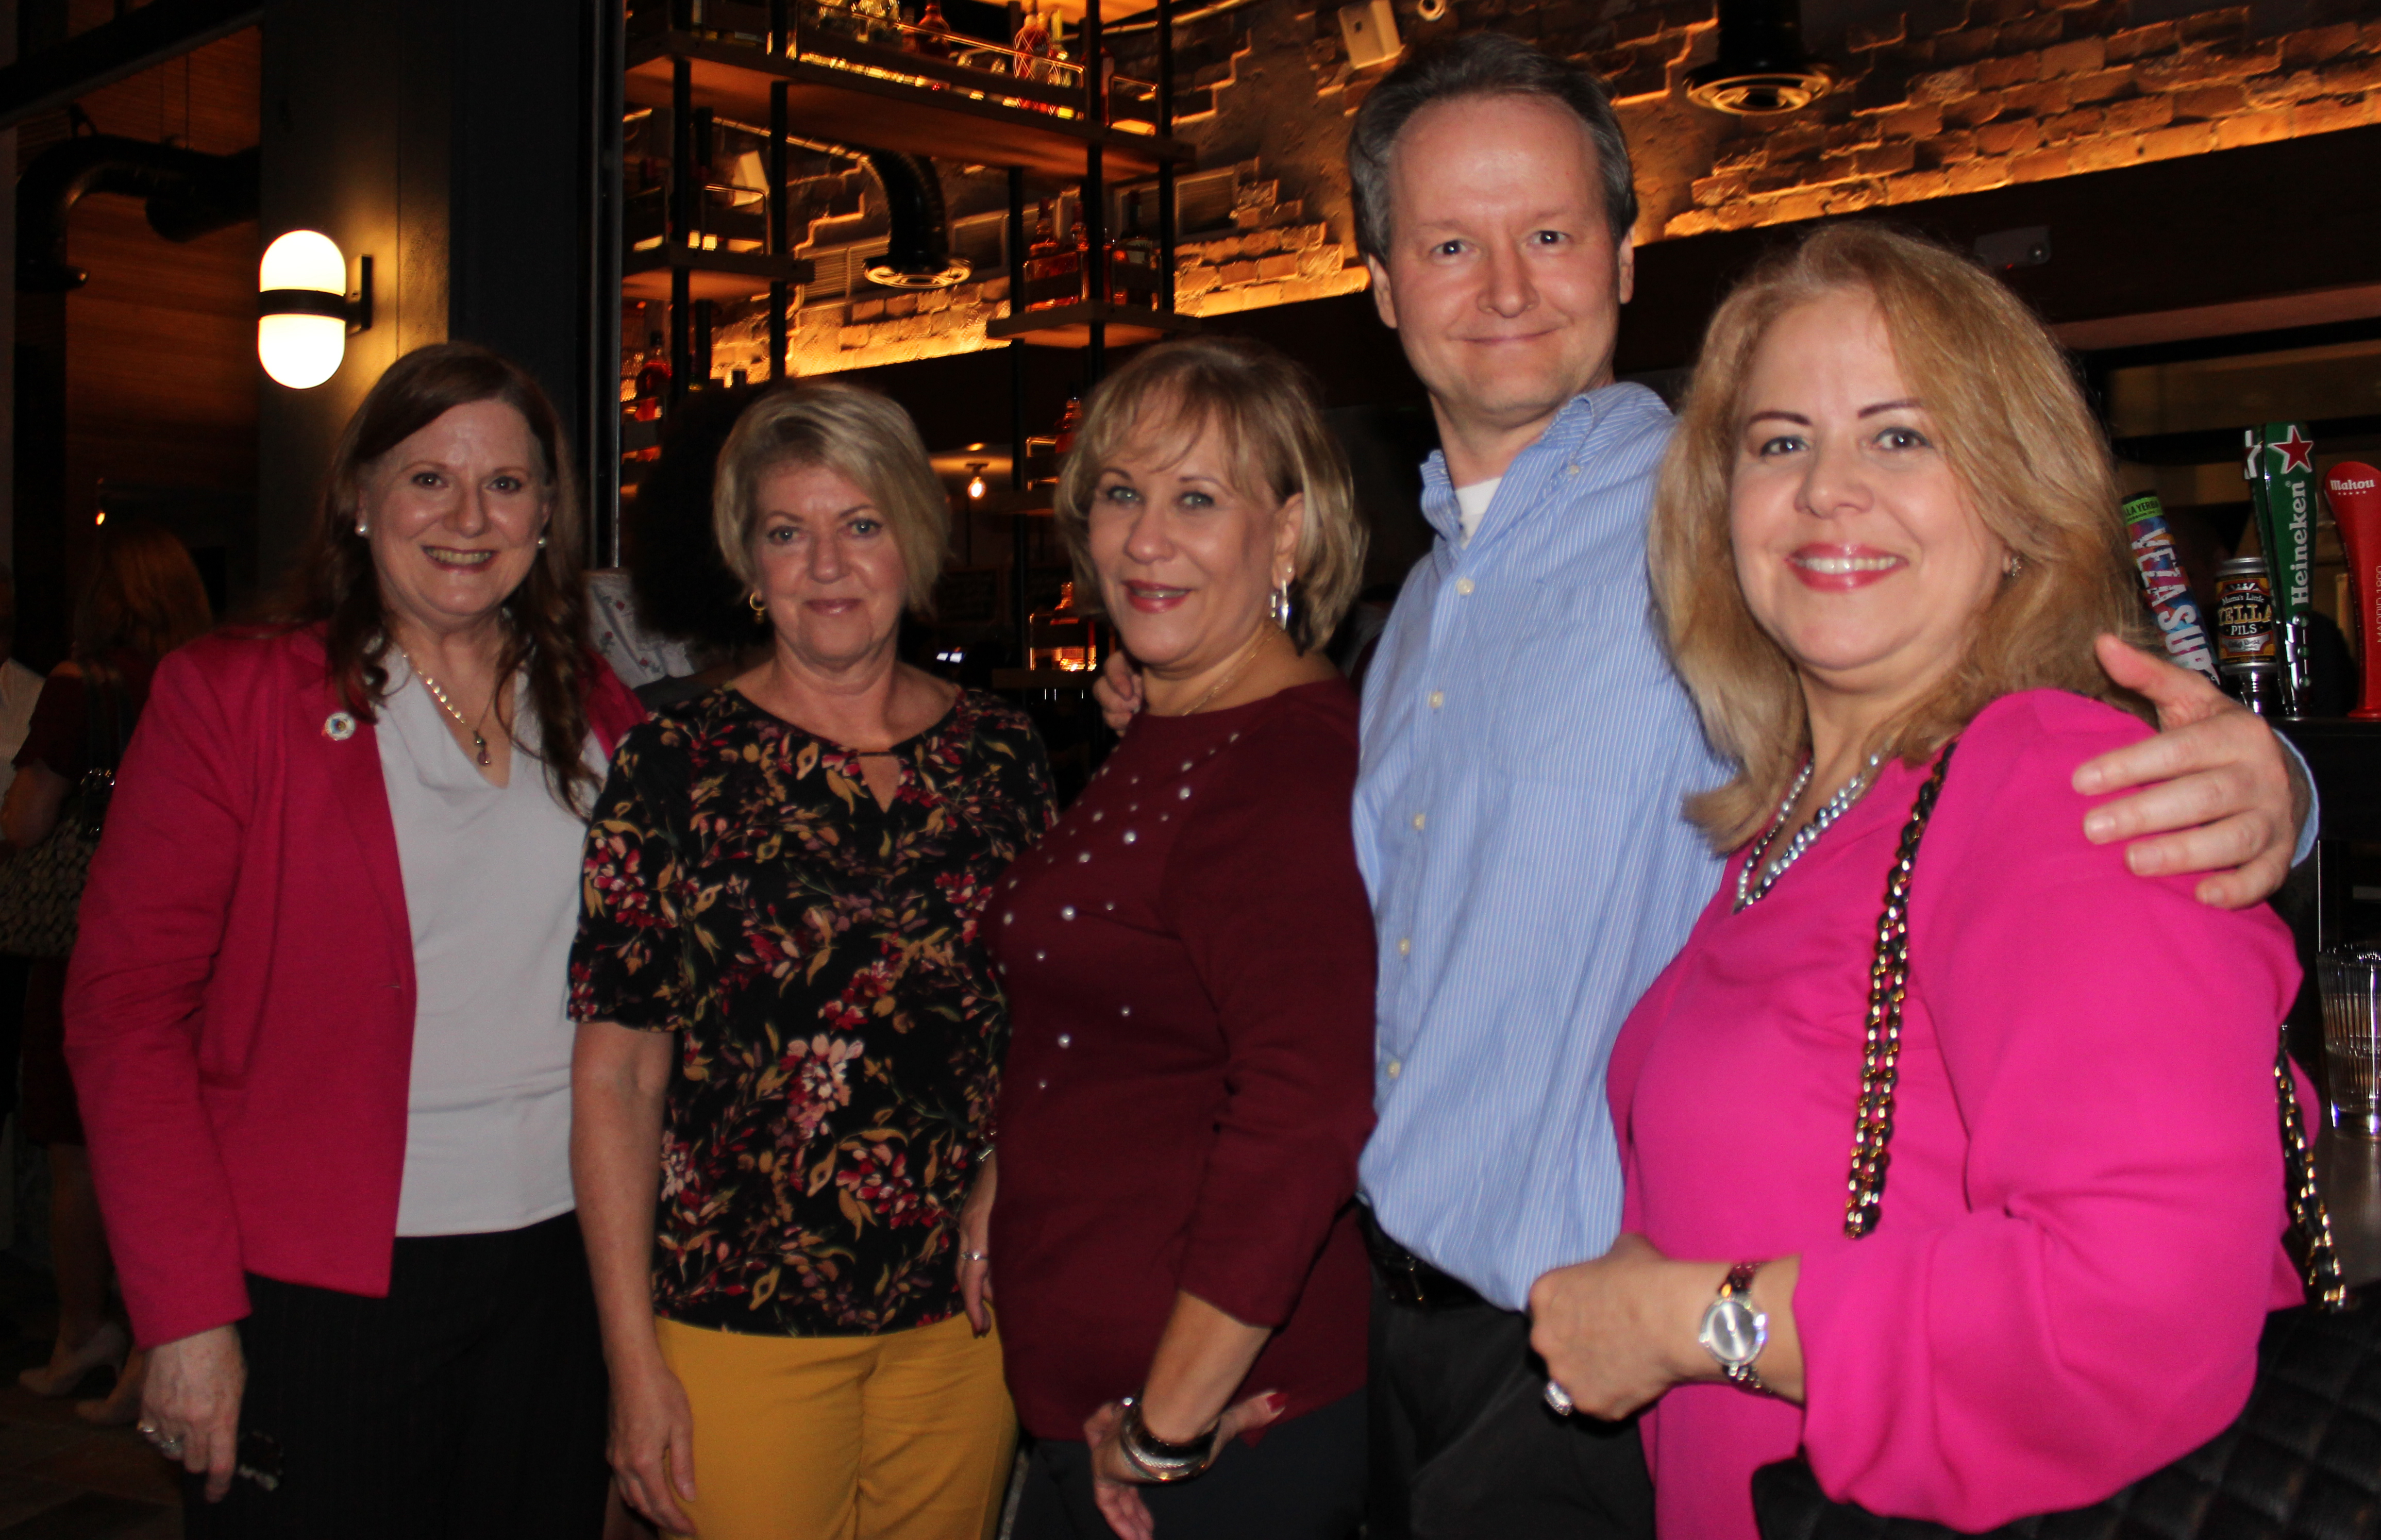 Doral Chamber of Commerce introduces Novecento Grand Opening group photo together.